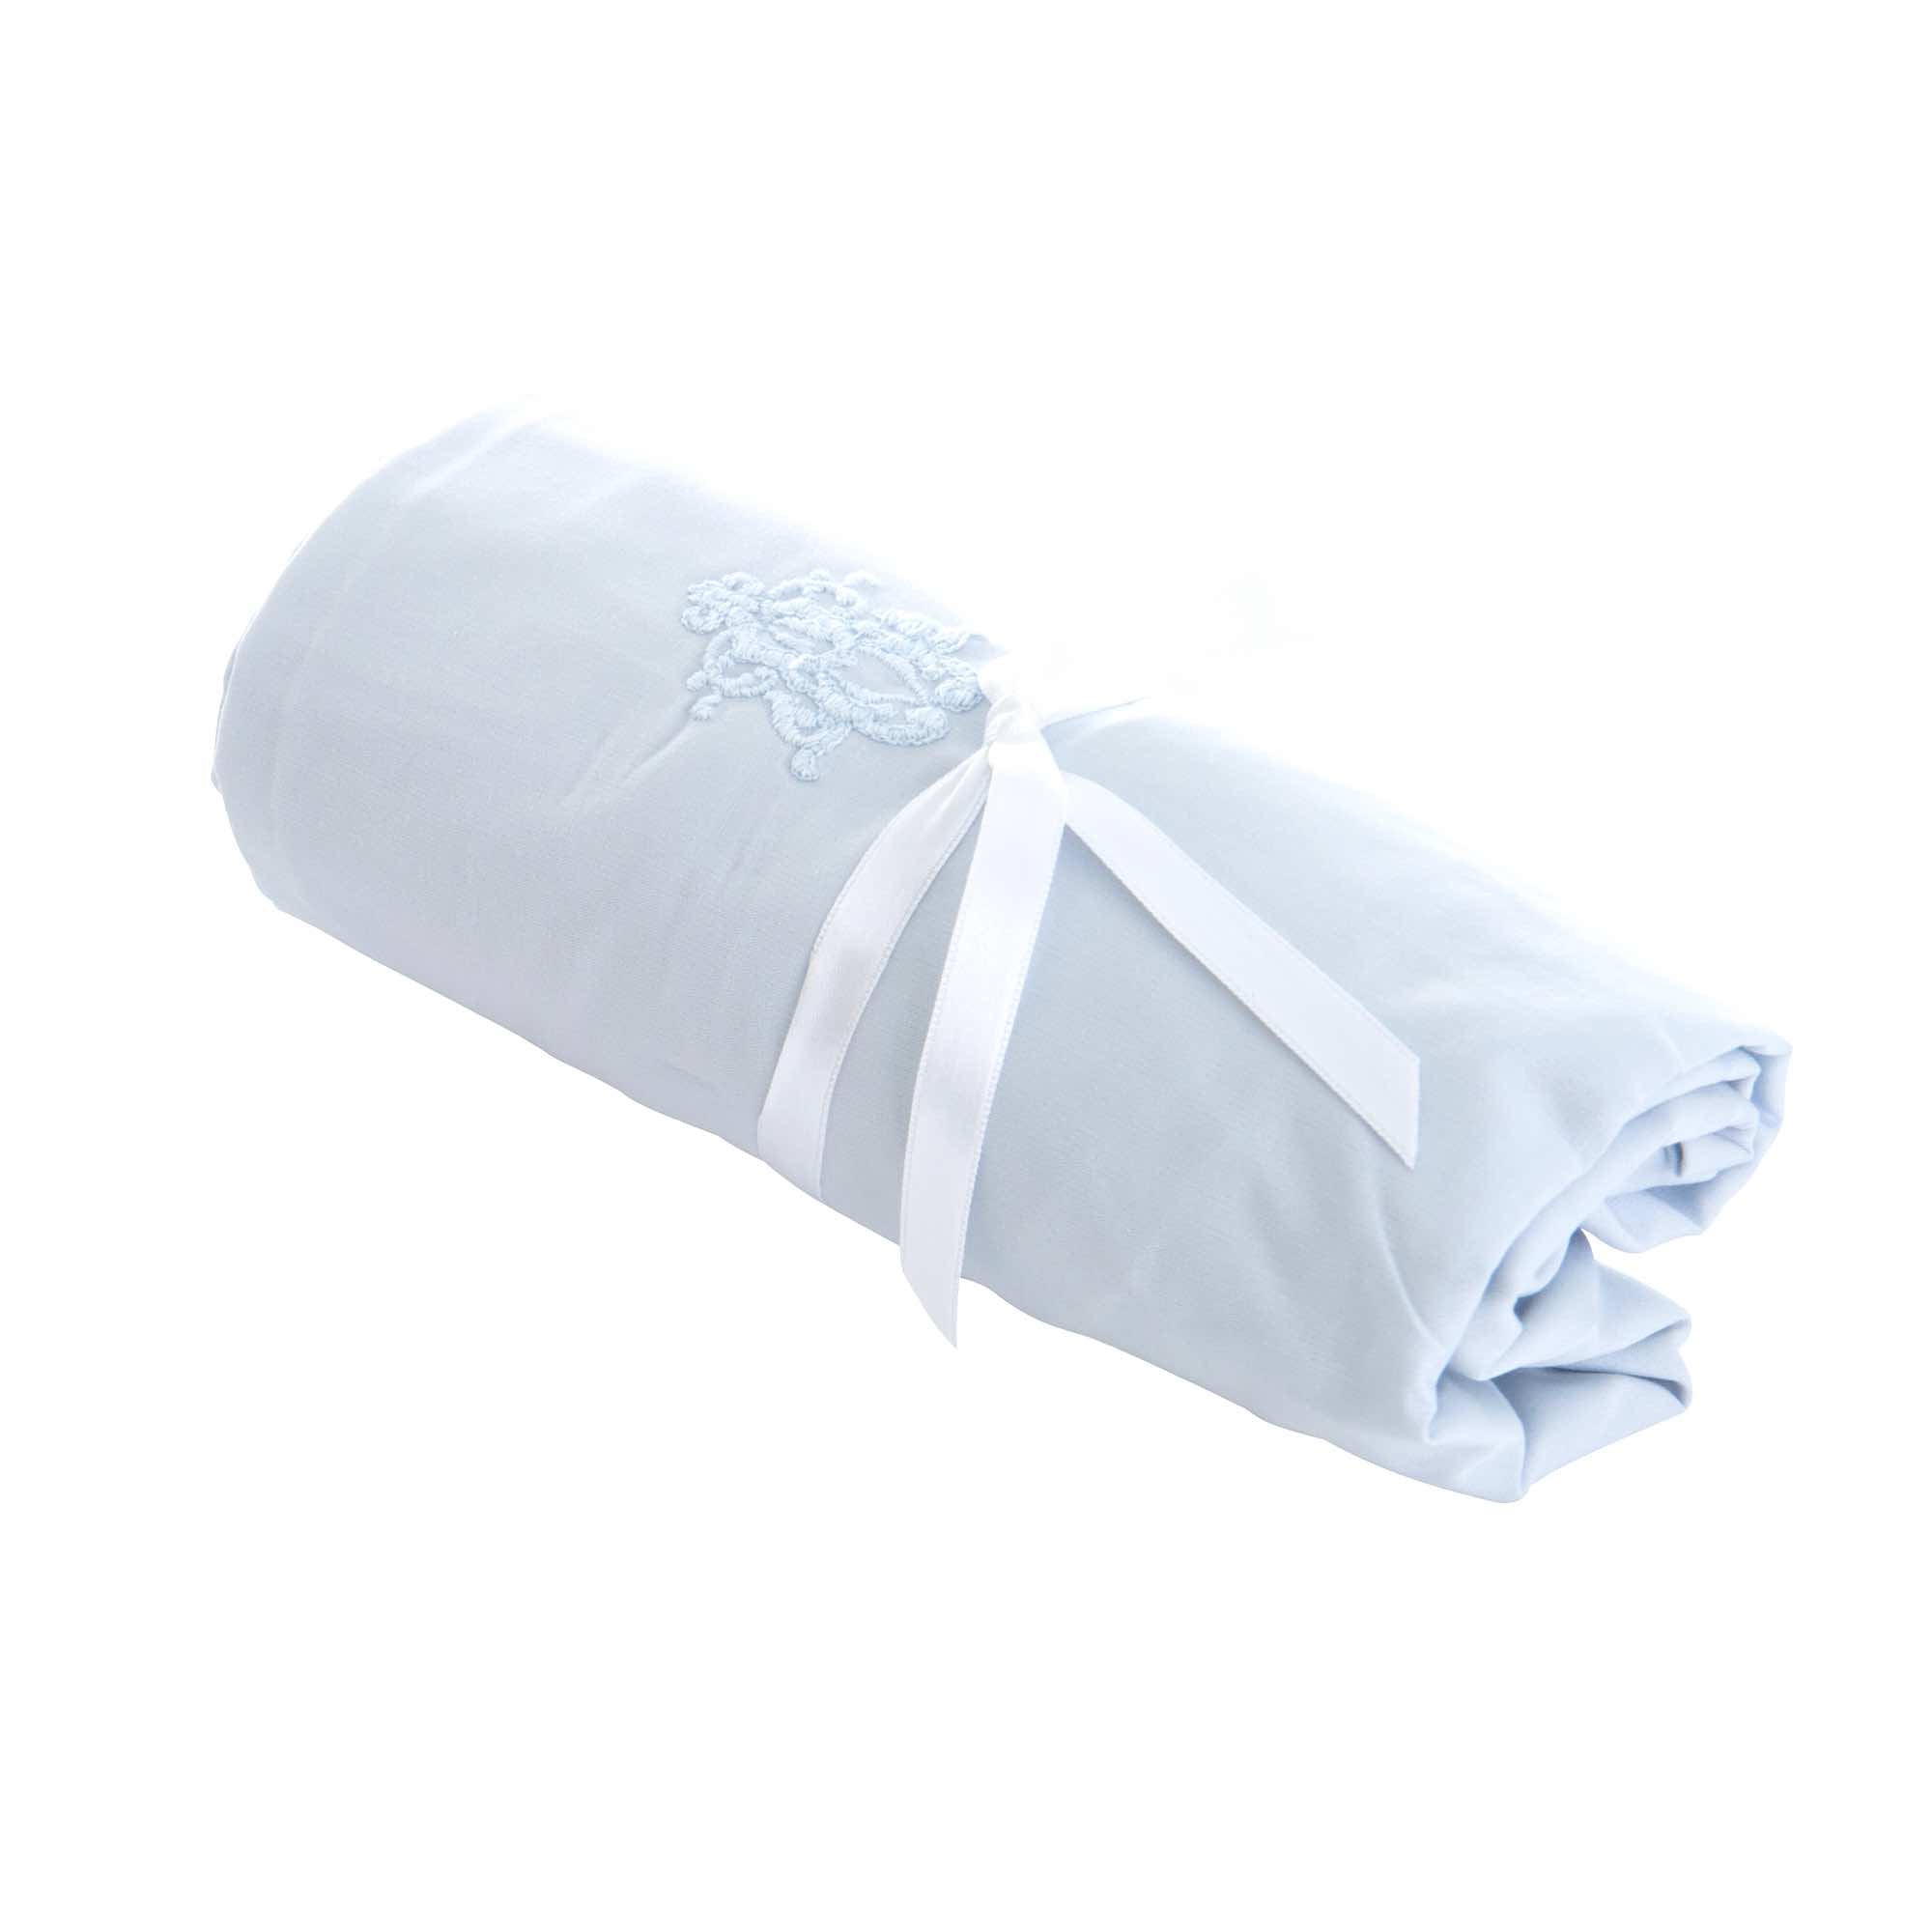 Theophile & Patachou Cradle Fitted Sheet - Royal Blue